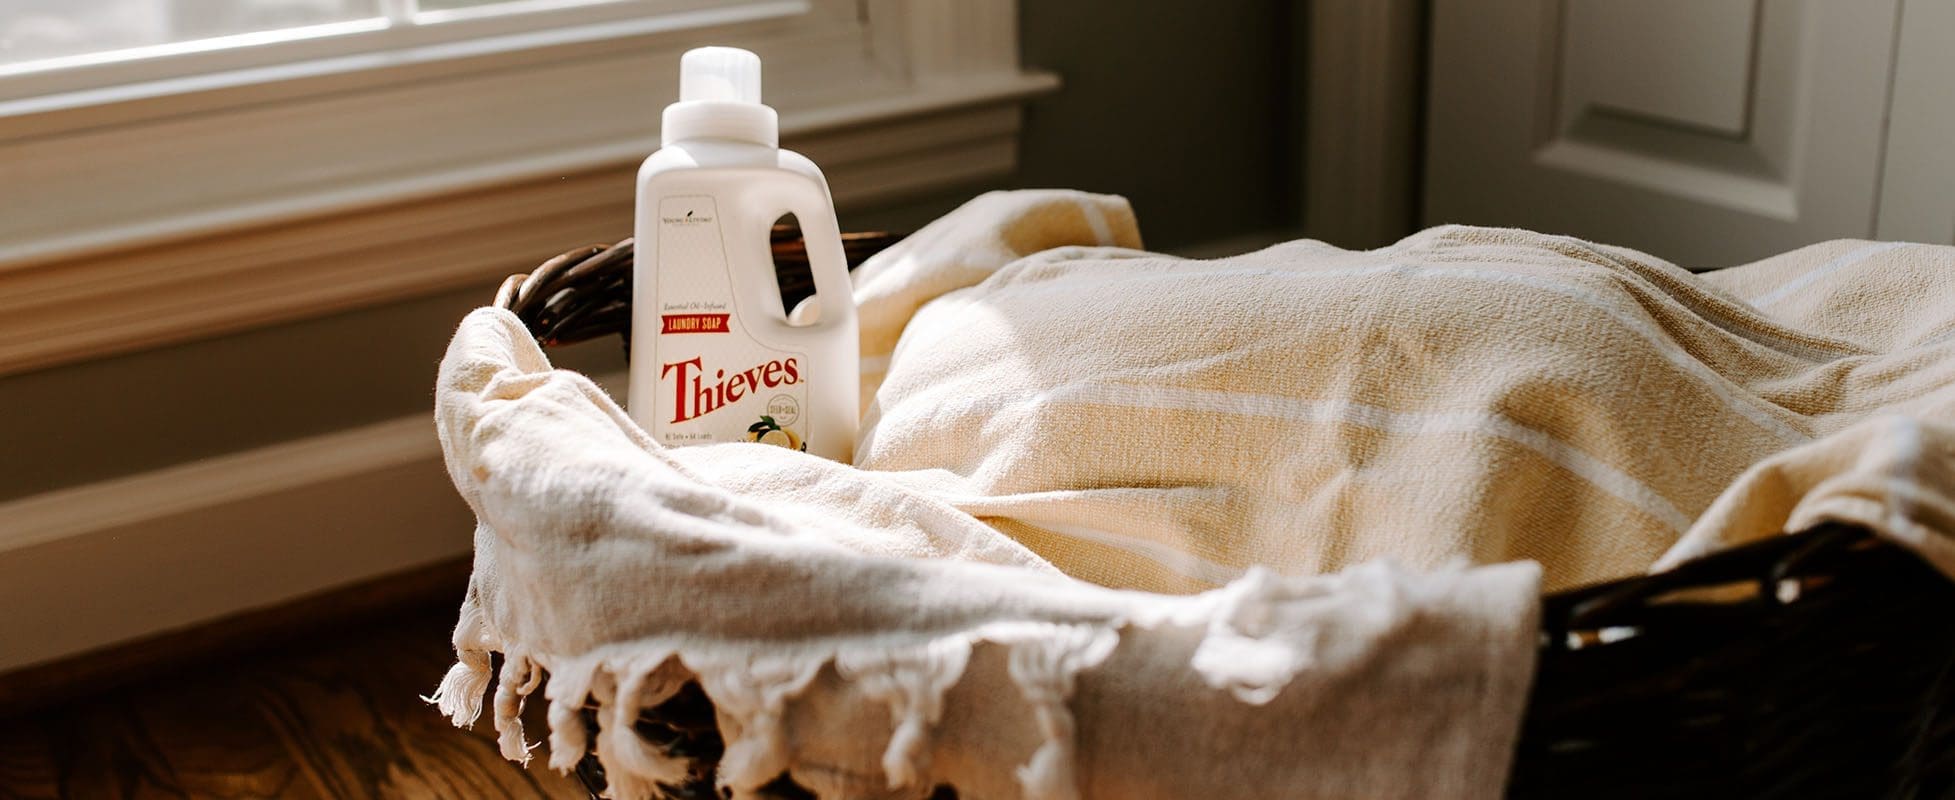 thieves laundry soap in basket of clean clothes